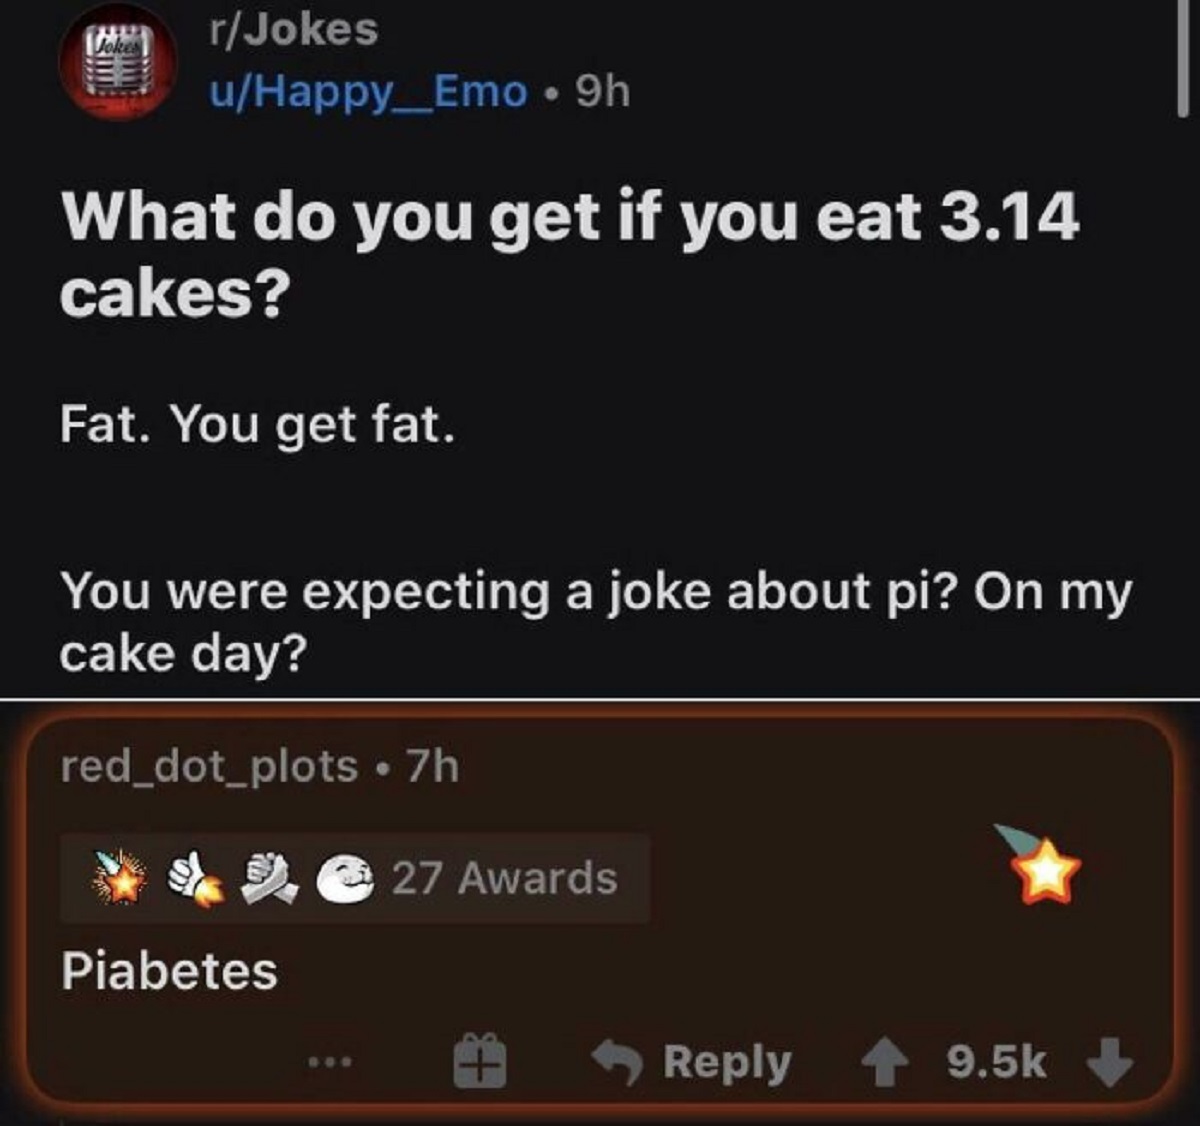 funny replies better than the original - software - rJokes uHappy_Emo 9h What do you get if you eat 3.14 cakes? Fat. You get fat. You were expecting a joke about pi? On my cake day? red_dot_plots Piabetes 7h 27 Awards